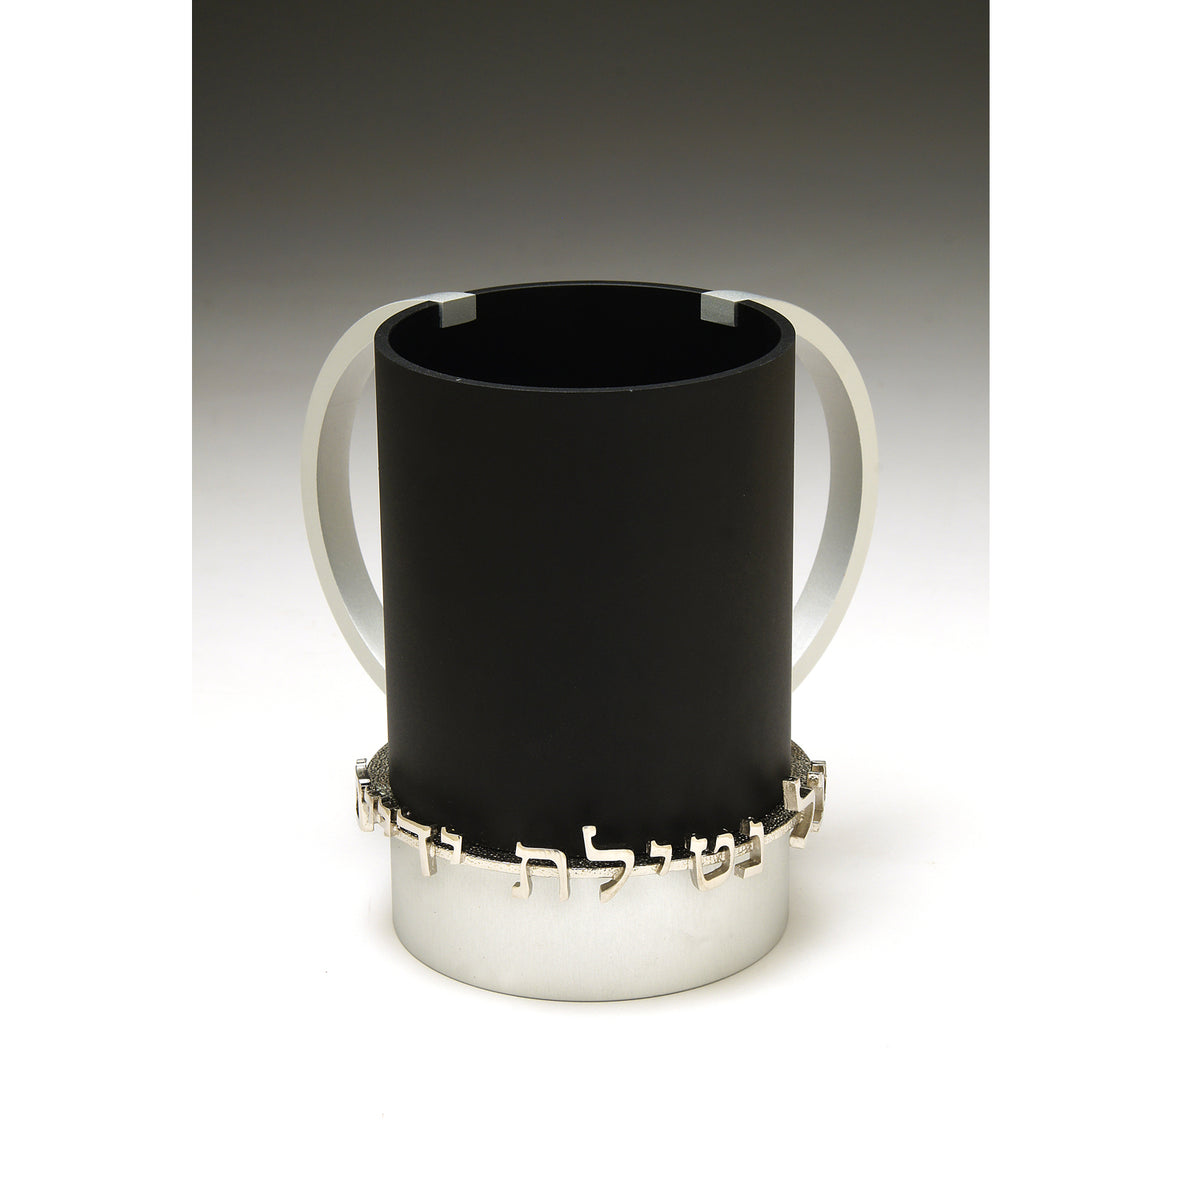 Dabbah Judaica - Washing Cup - Black and Silver